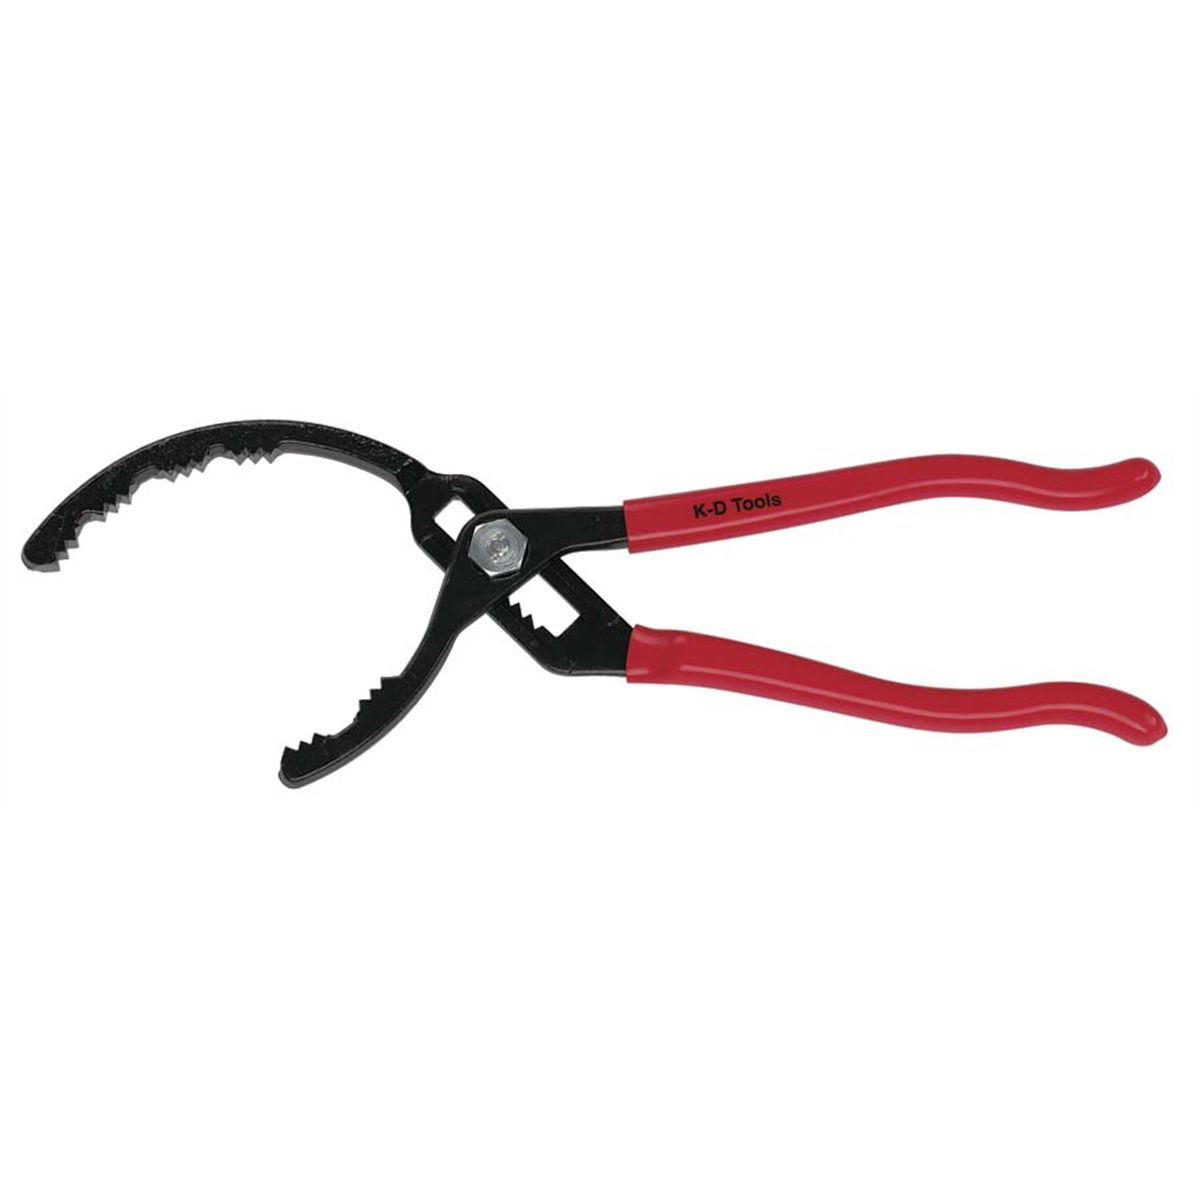 GearWrench Oil Filter Pliers - Ratcheting